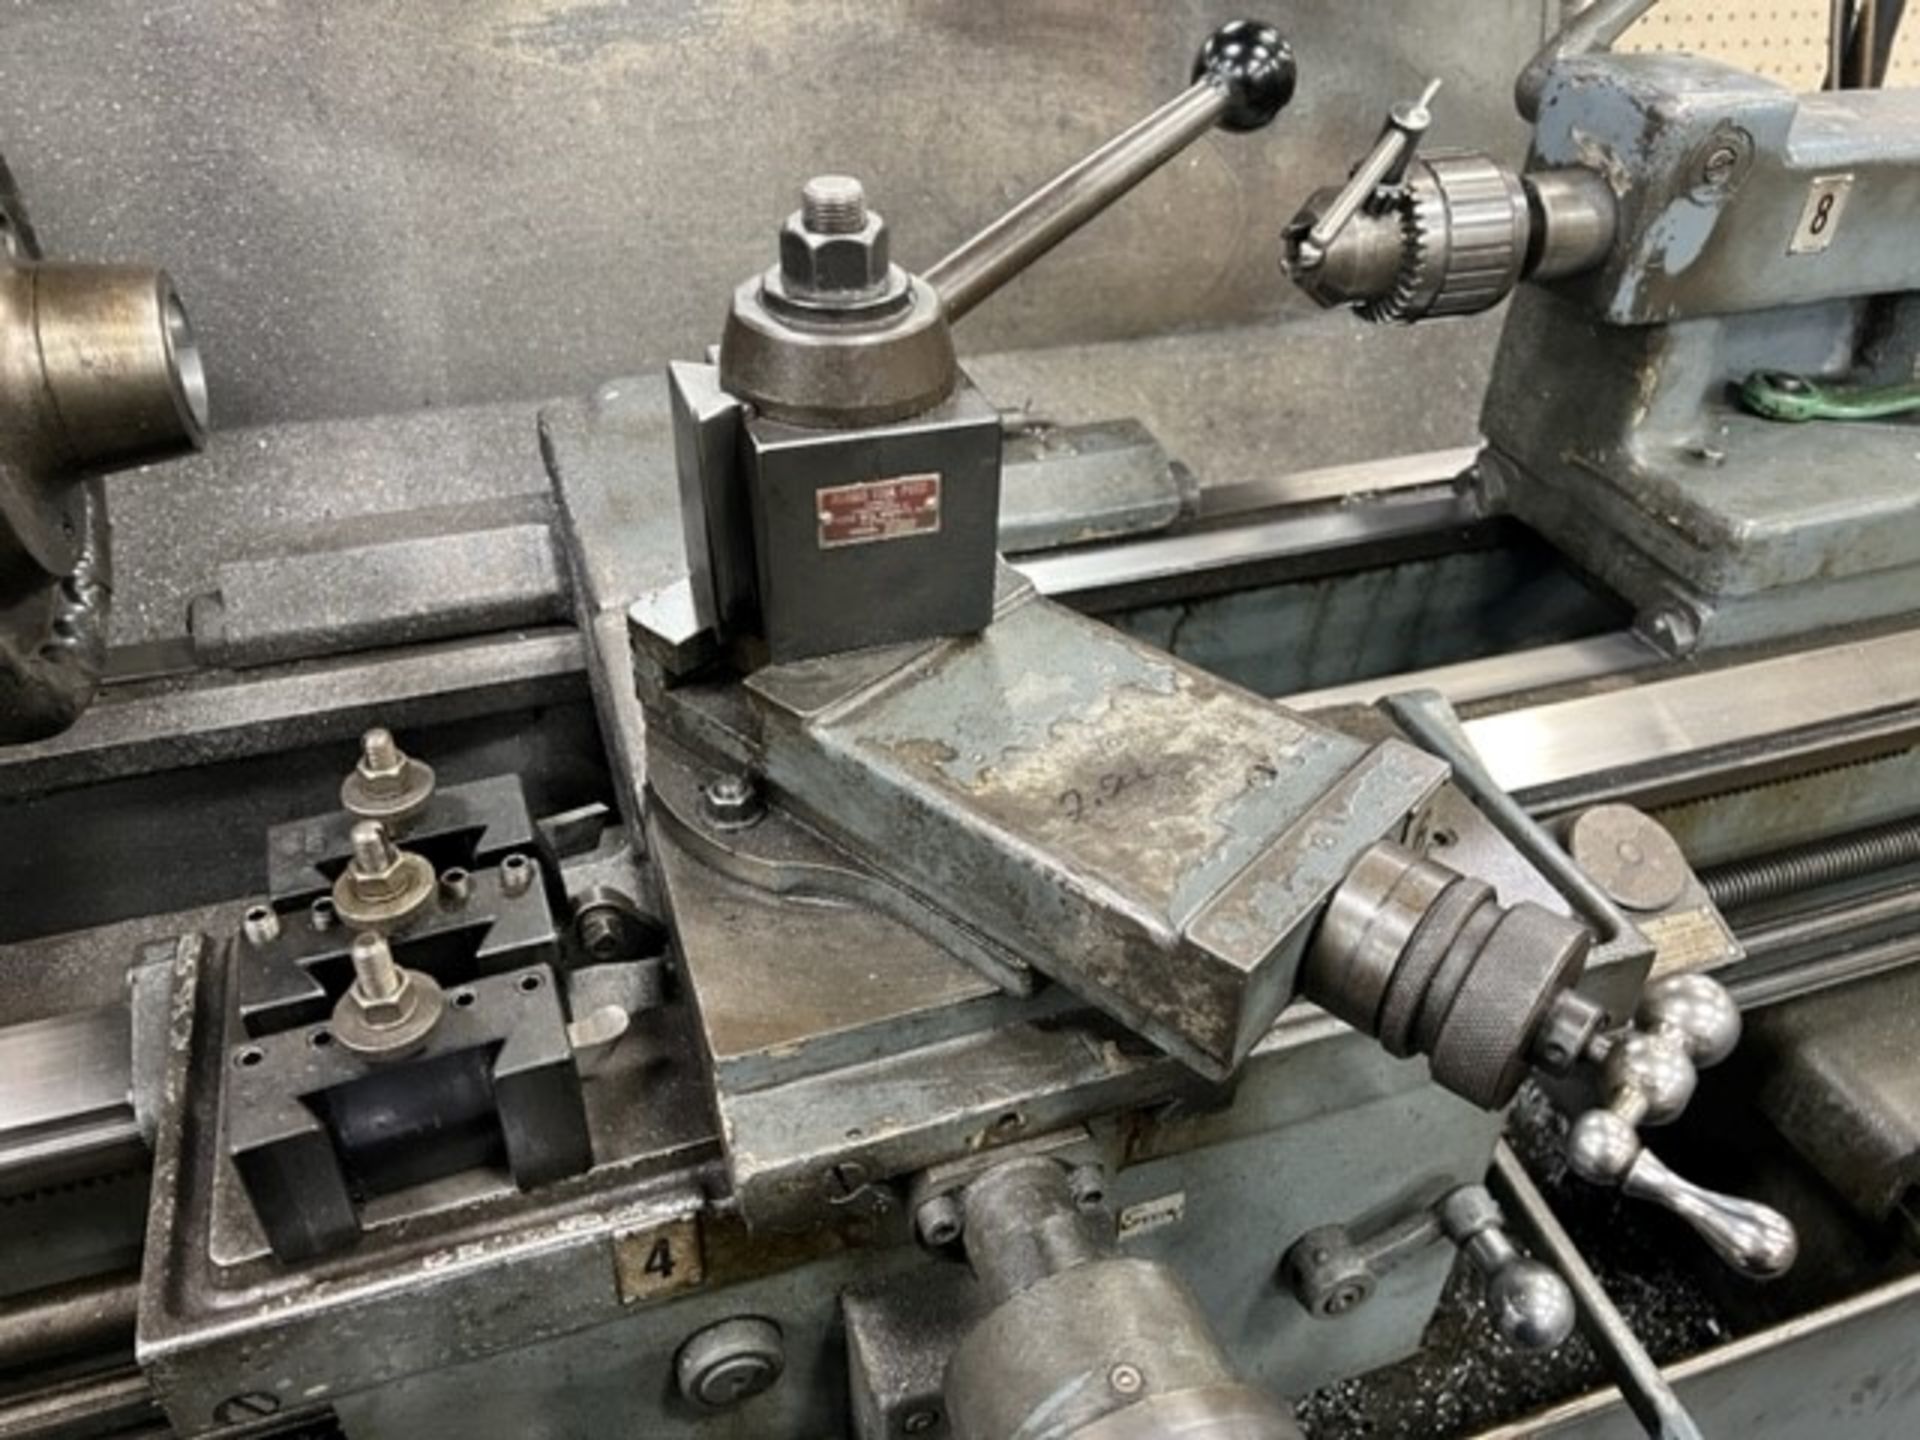 LEBLOND Regal 15”x 30” Tool Room Lathe, s/n 8C4148, 2J Speed Collet Chuck, Quick Change Tool Post, - Image 4 of 11